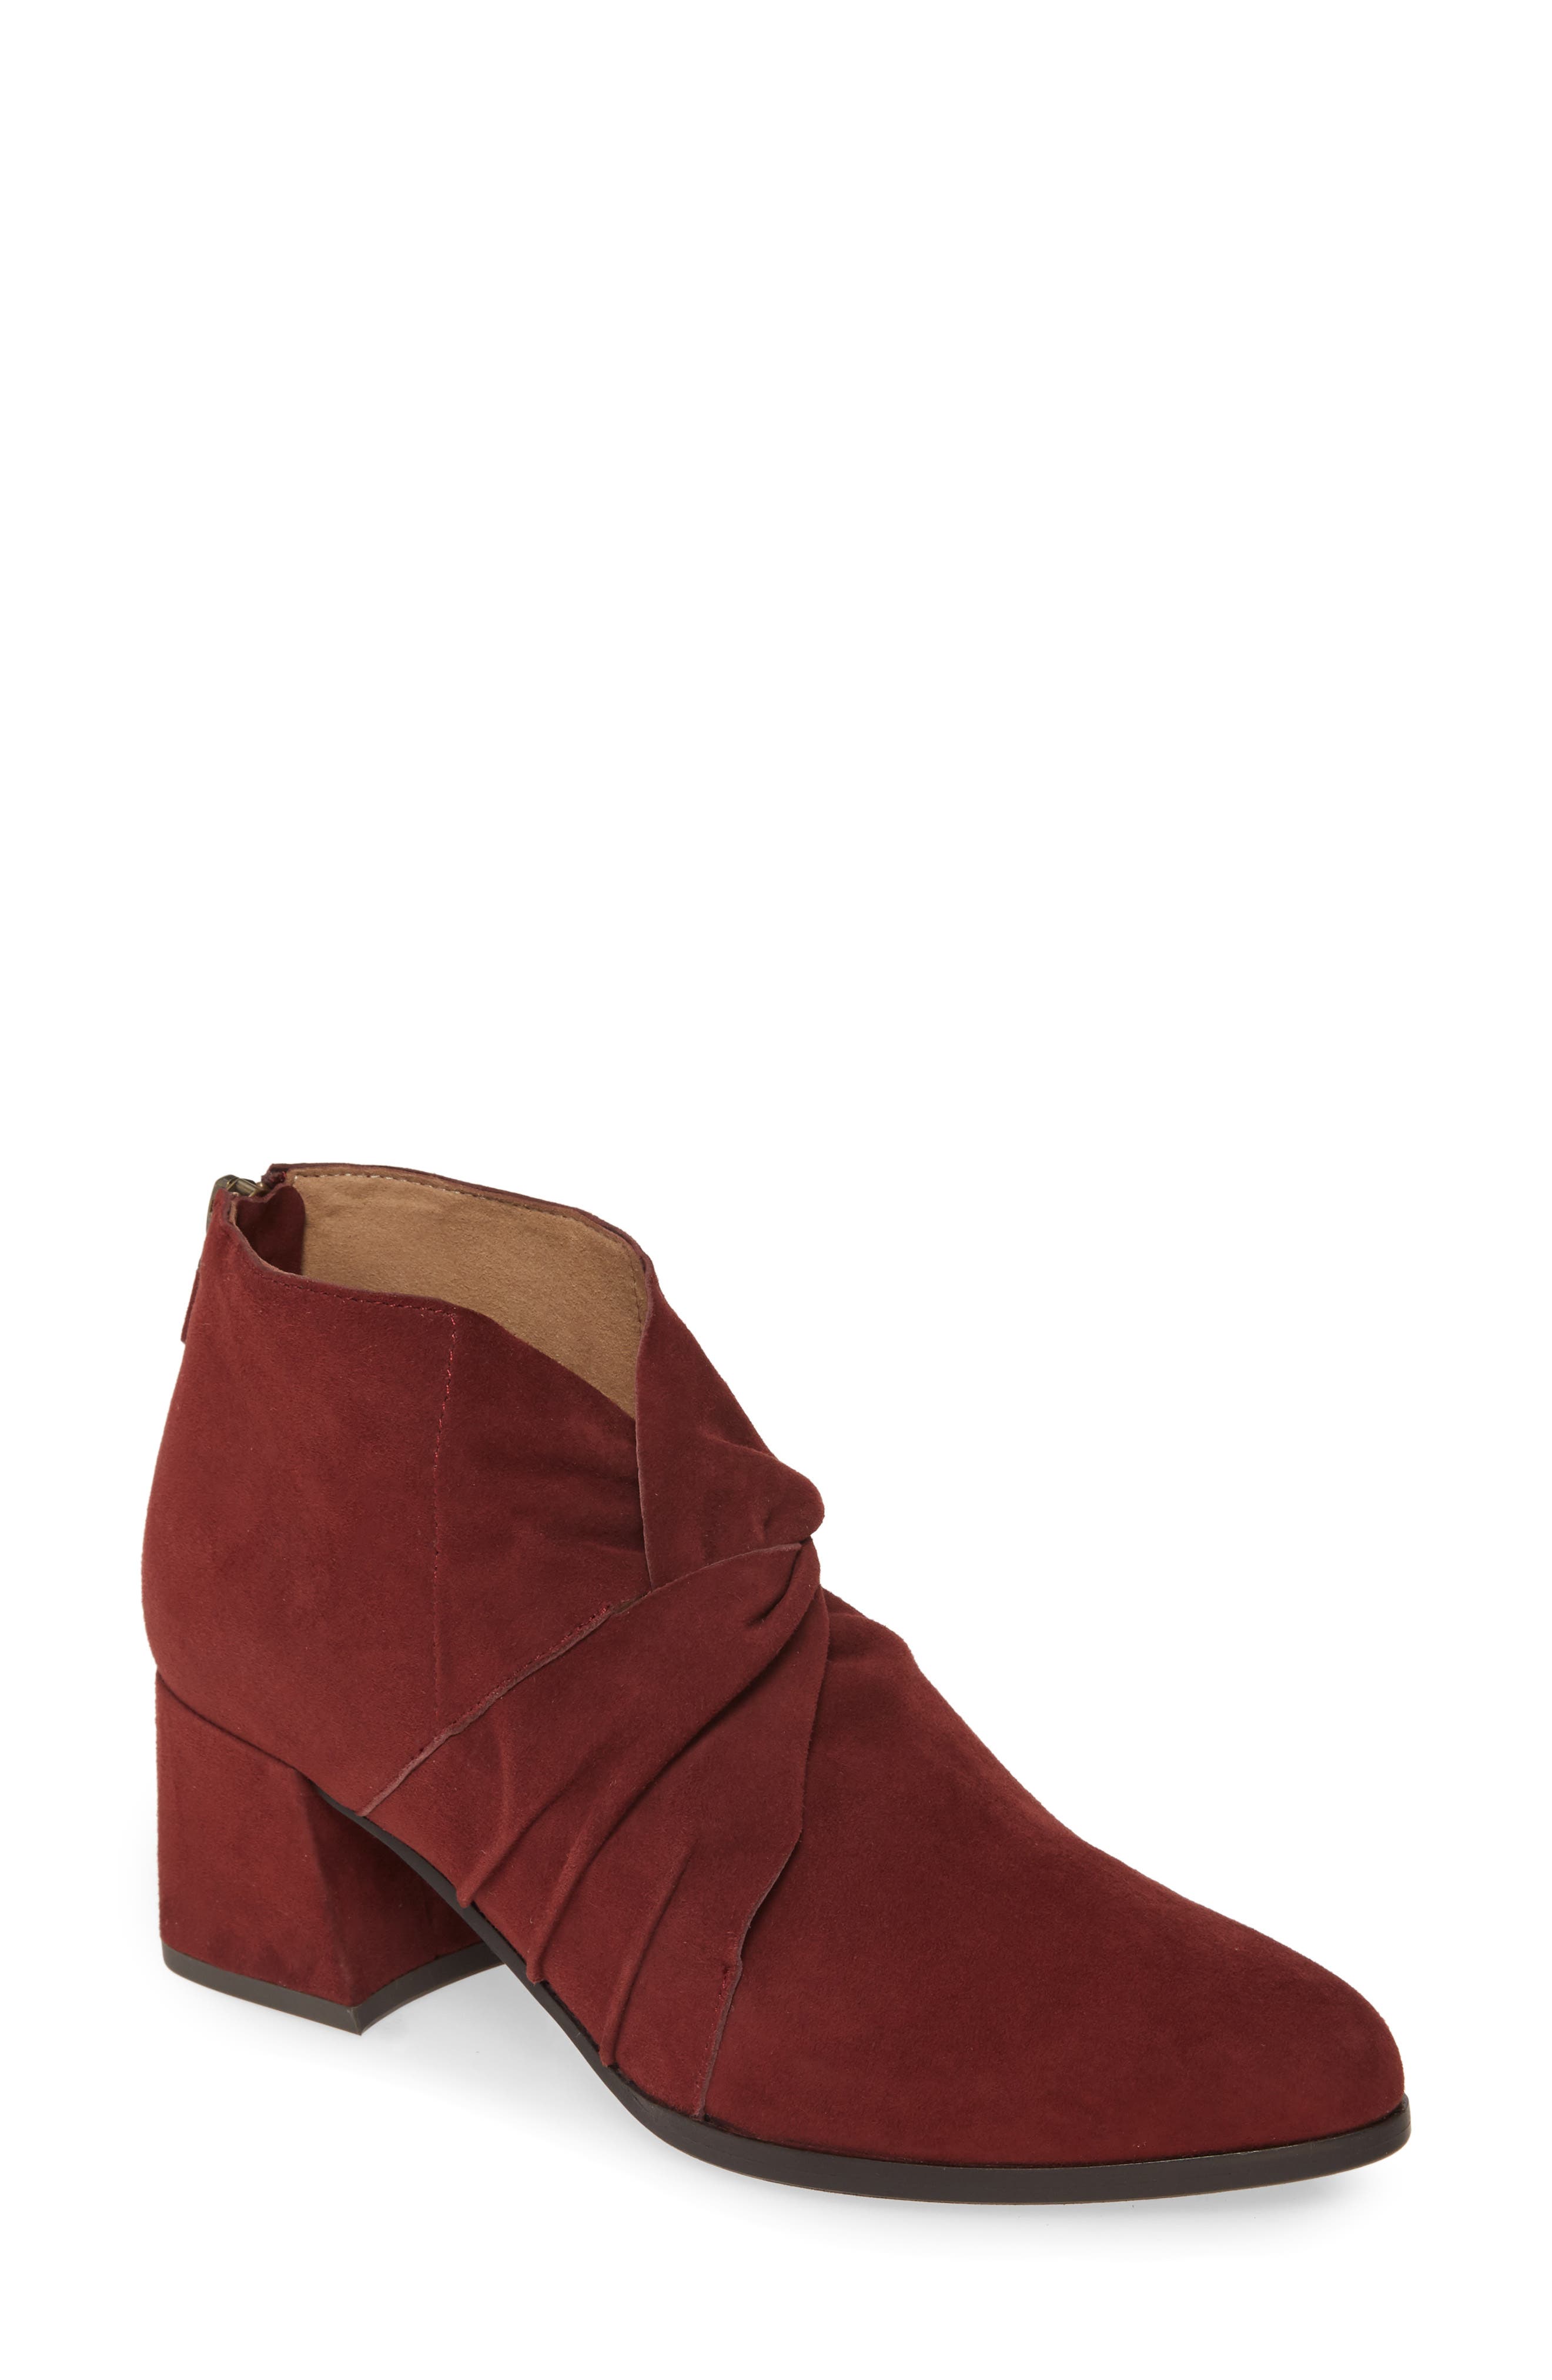 eileen fisher shoes sale nordstrom